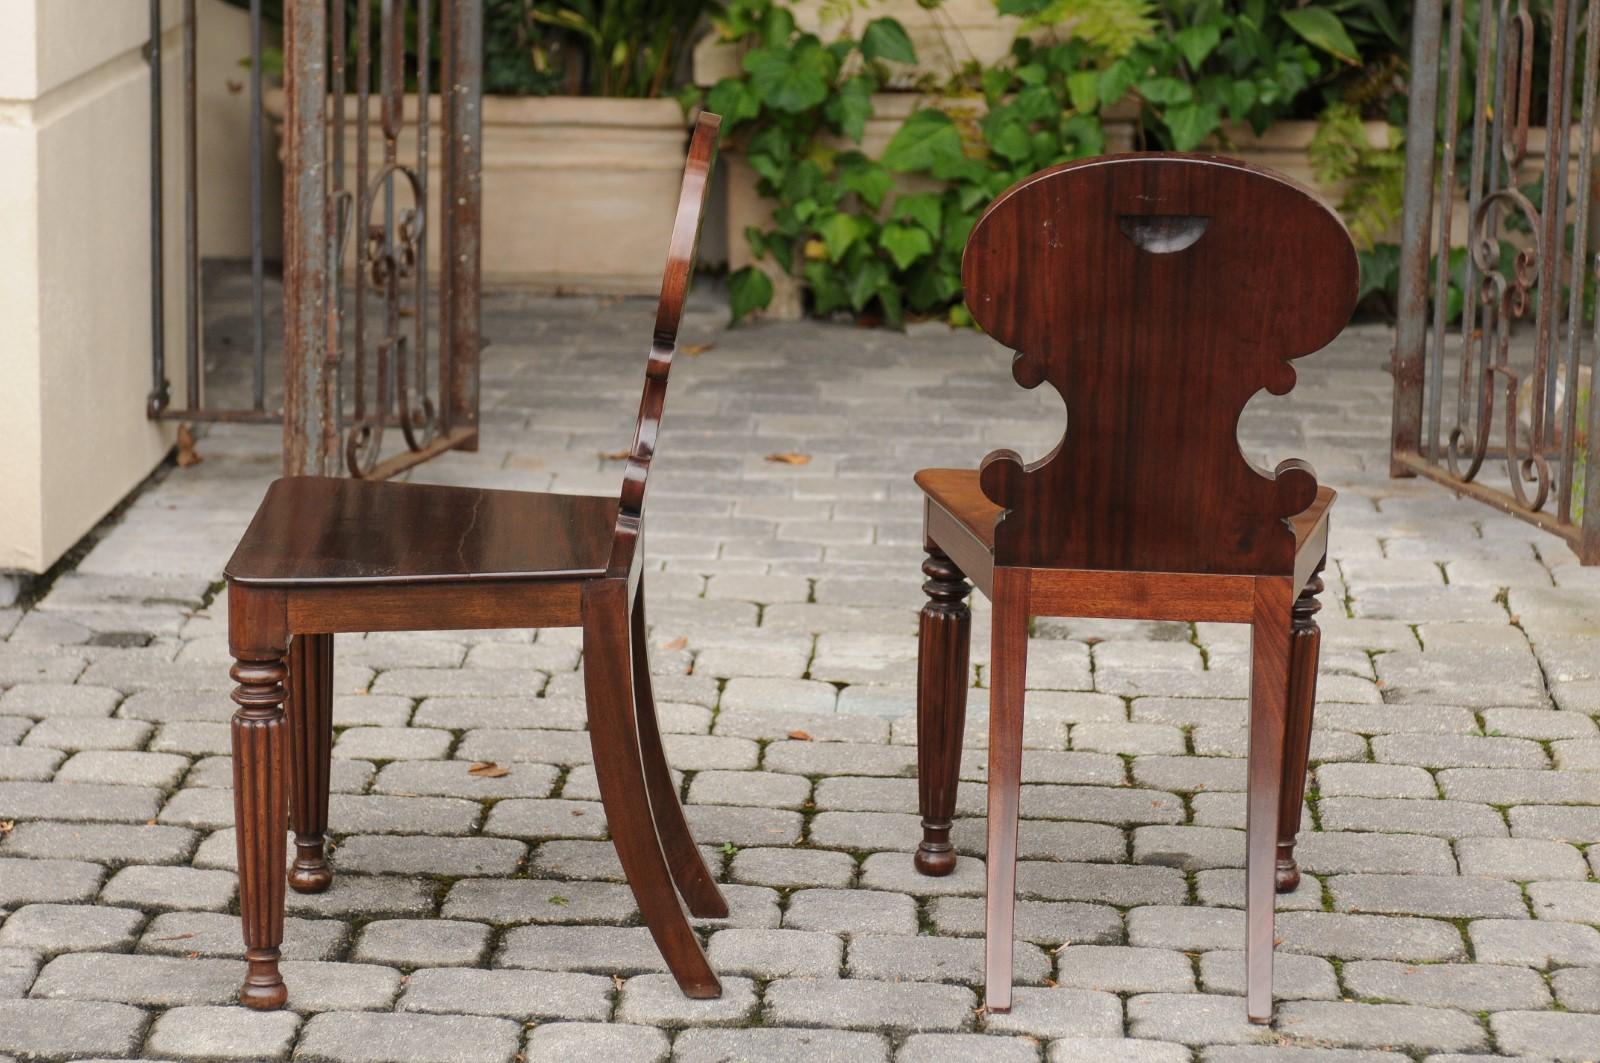 Pair of Regency Style 1870s Carved Mahogany Hall Chairs with C-Scroll Backs 1